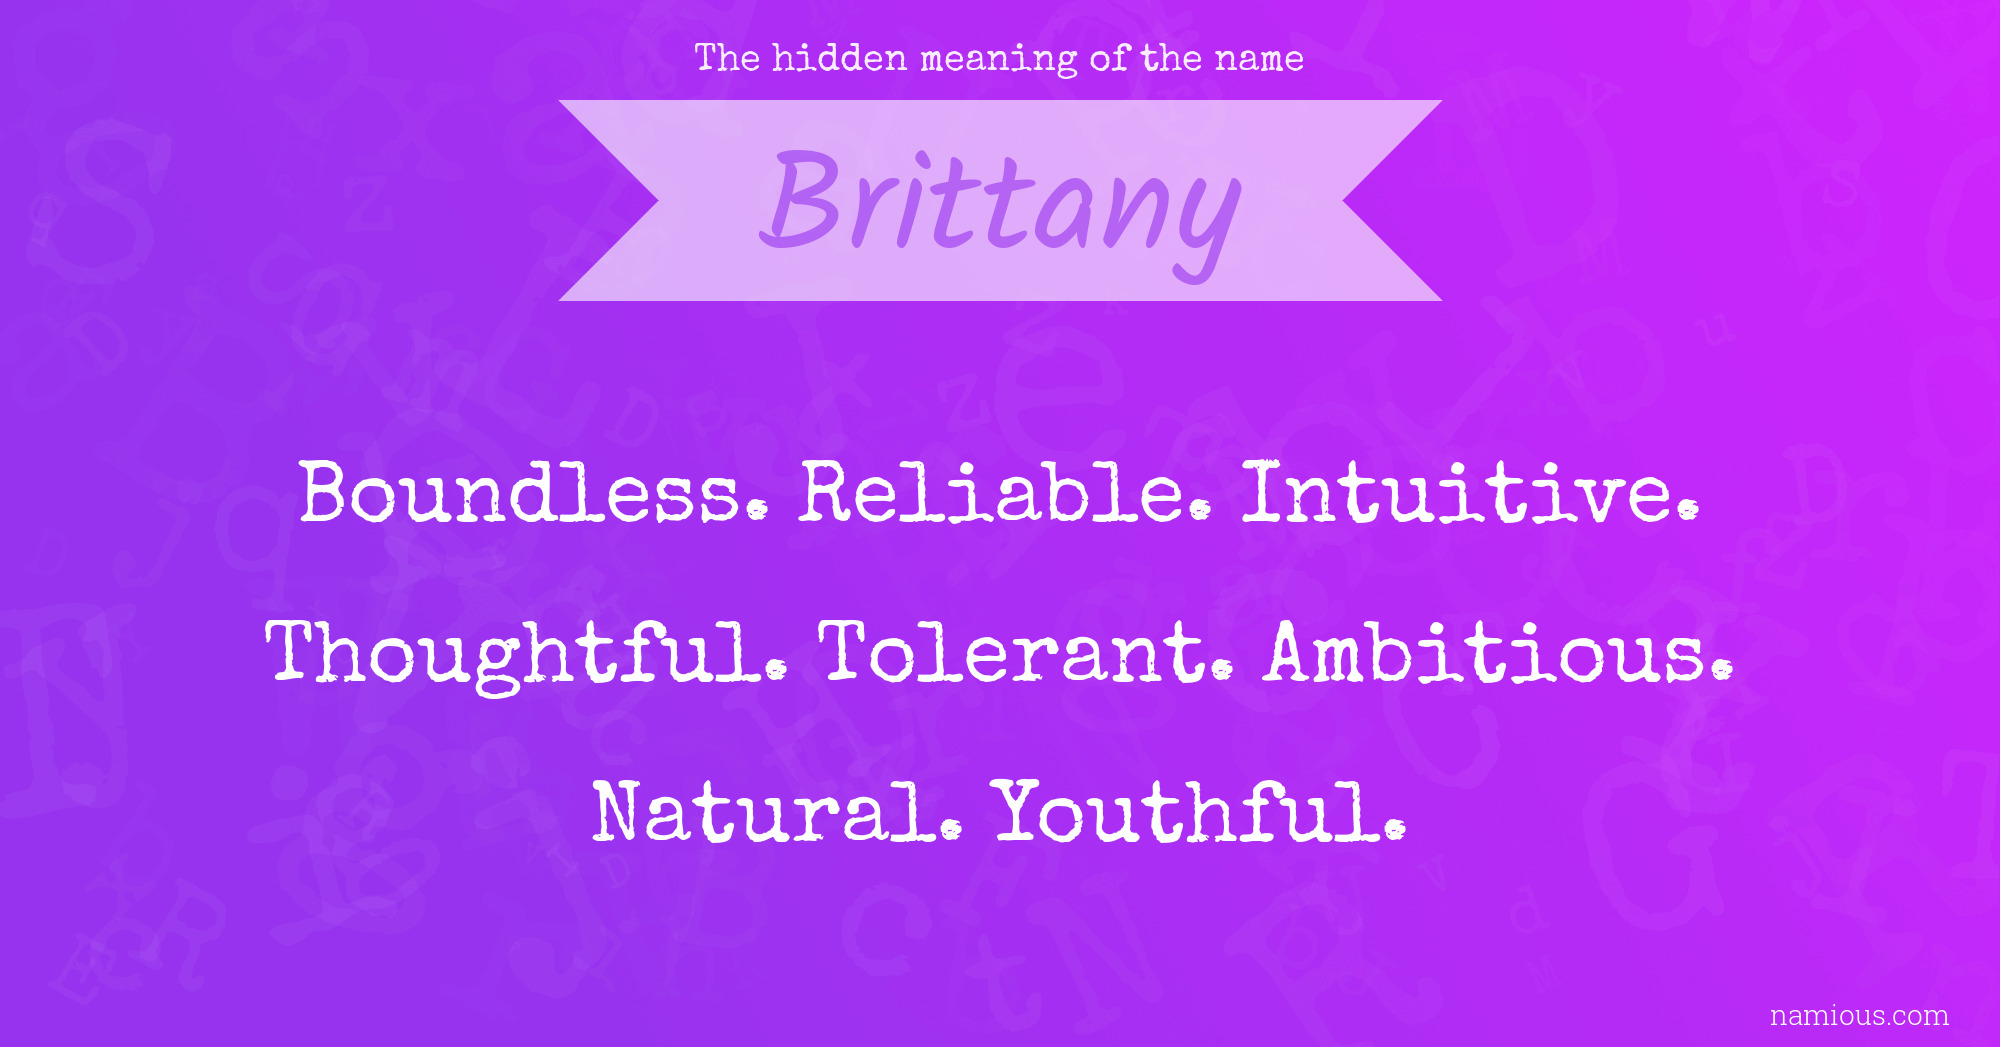 The hidden meaning of the name Brittany